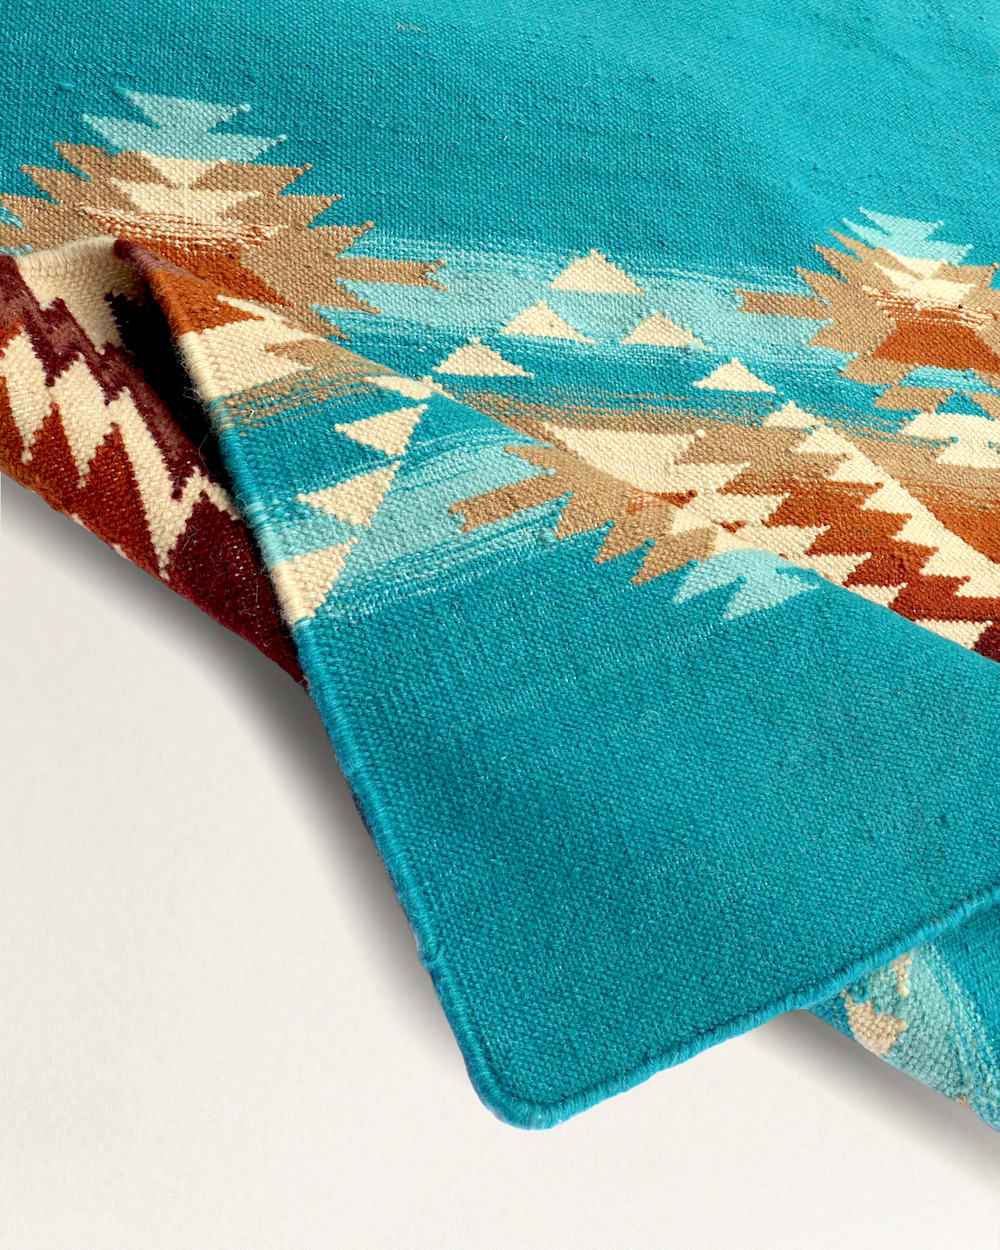 ALTERNATE VIEW OF PAGOSA SPRINGS STRIPE RUG IN TURQUOISE MULTI image number 3